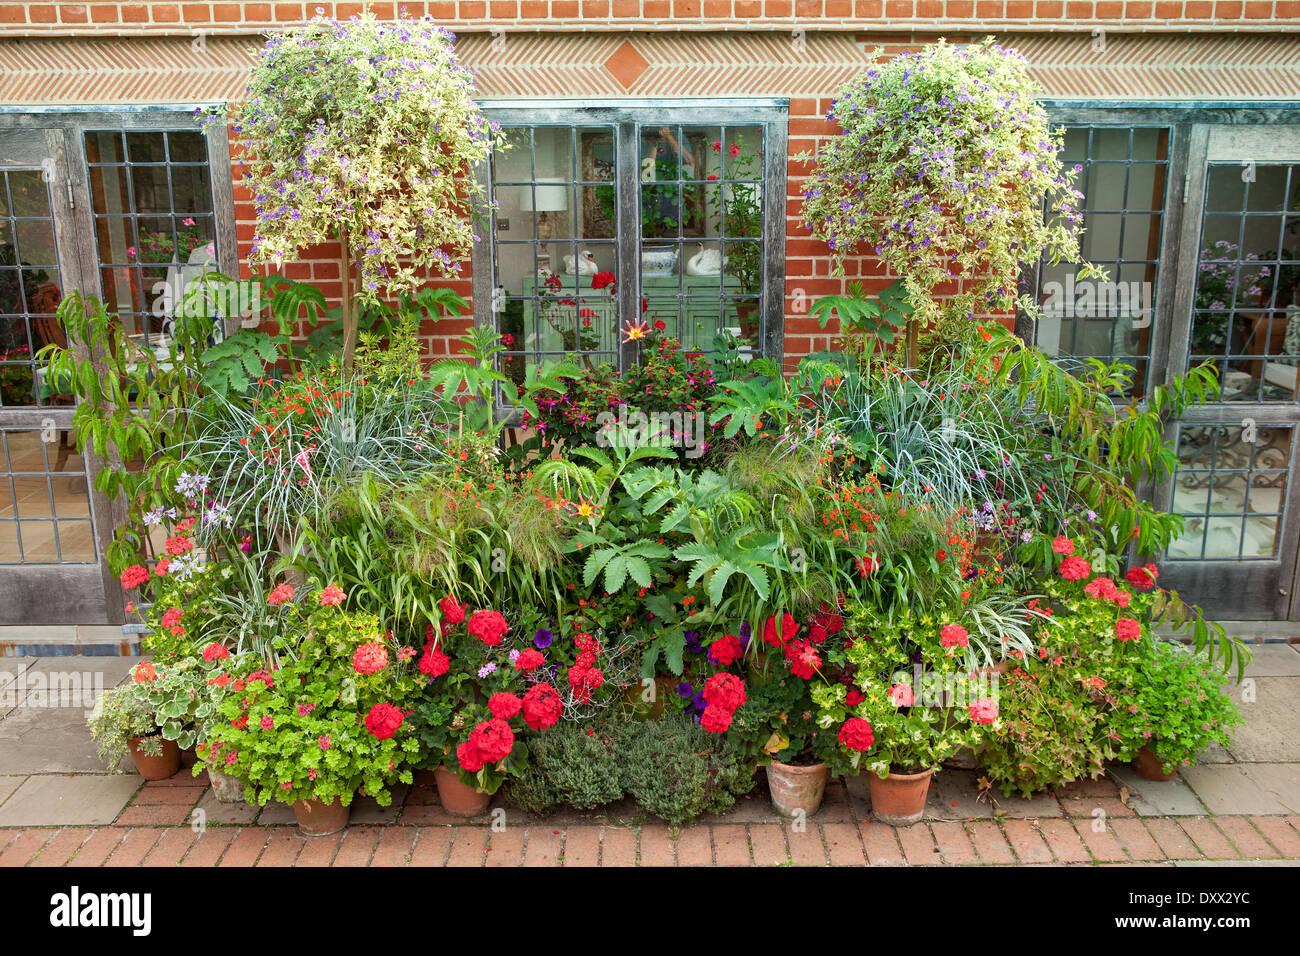 https://c8.alamy.com/comp/DXX2YC/mixed-container-combinations-and-display-august-summer-DXX2YC.jpg